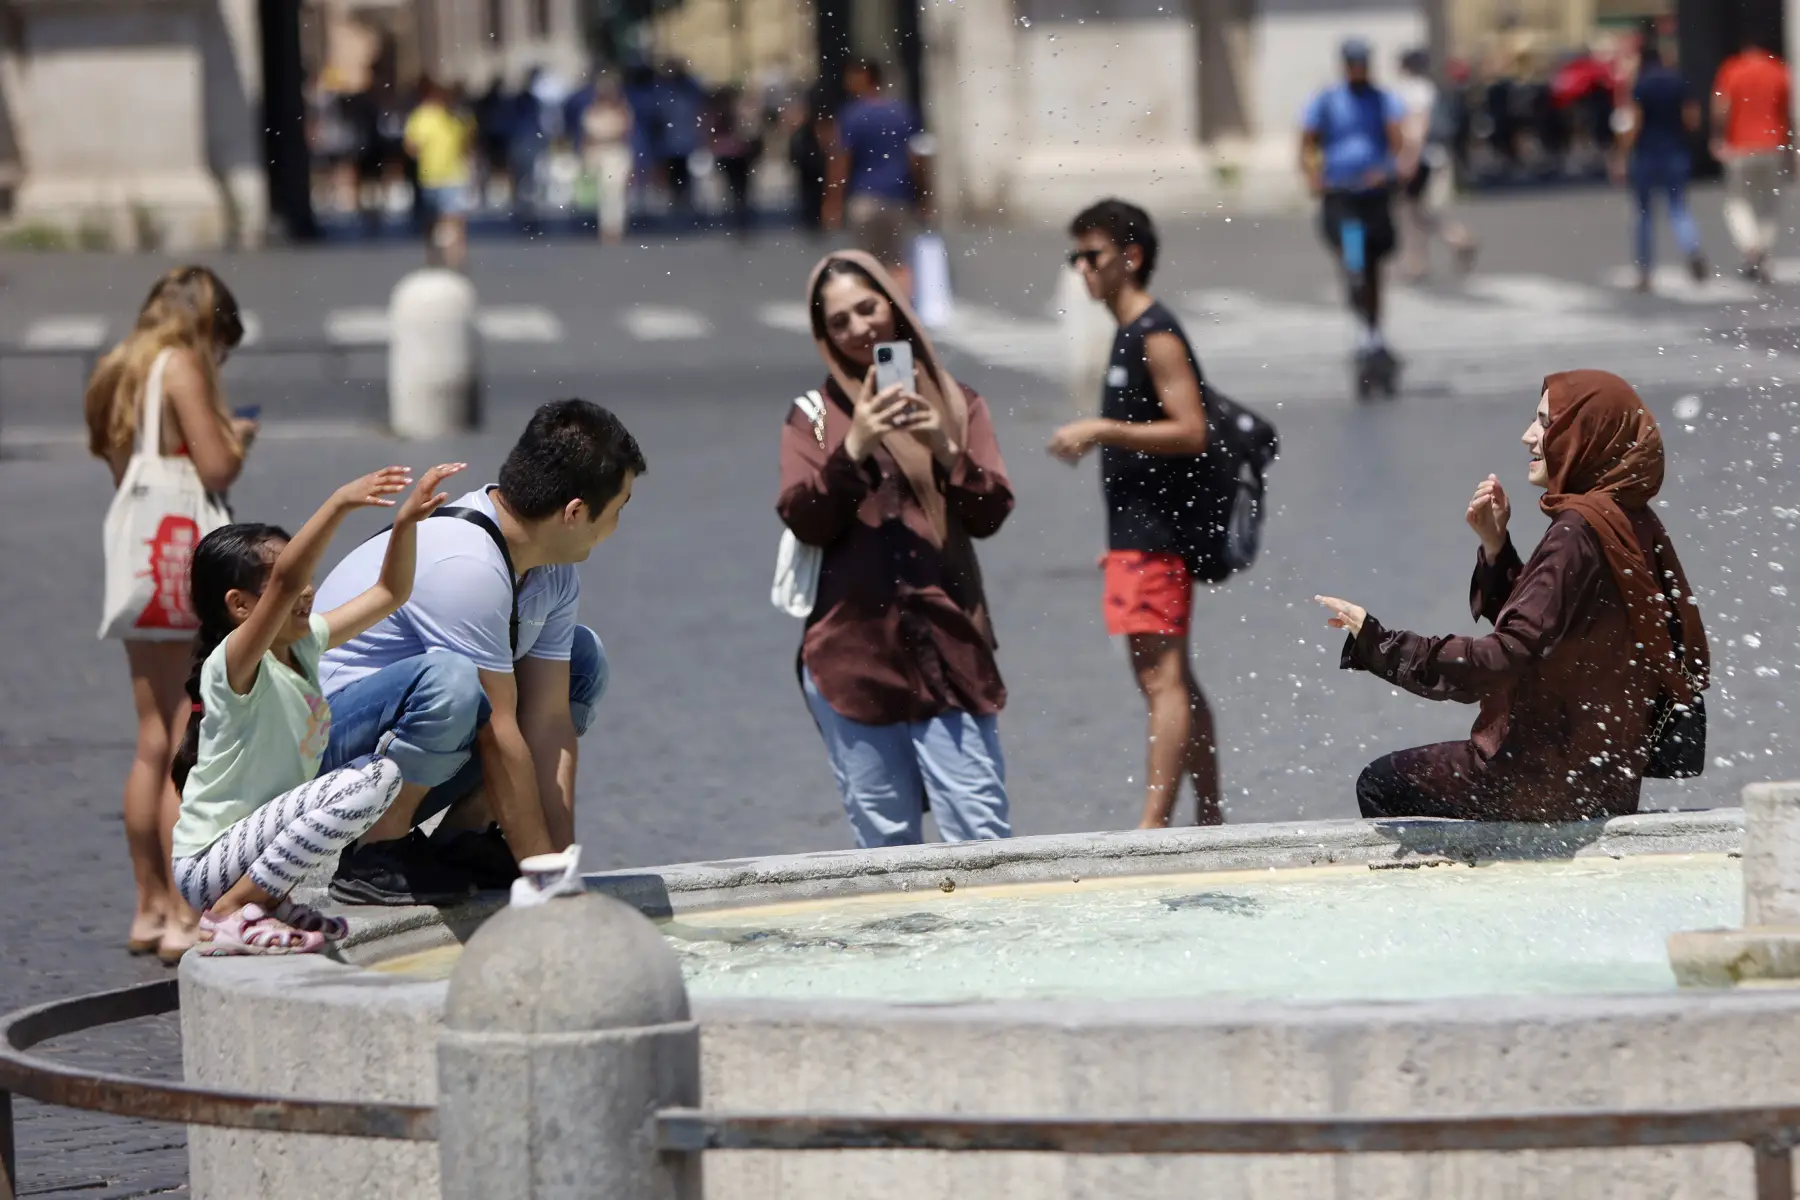 People cooling down with water from a fountain on a very hot day in Rome, taking photos.